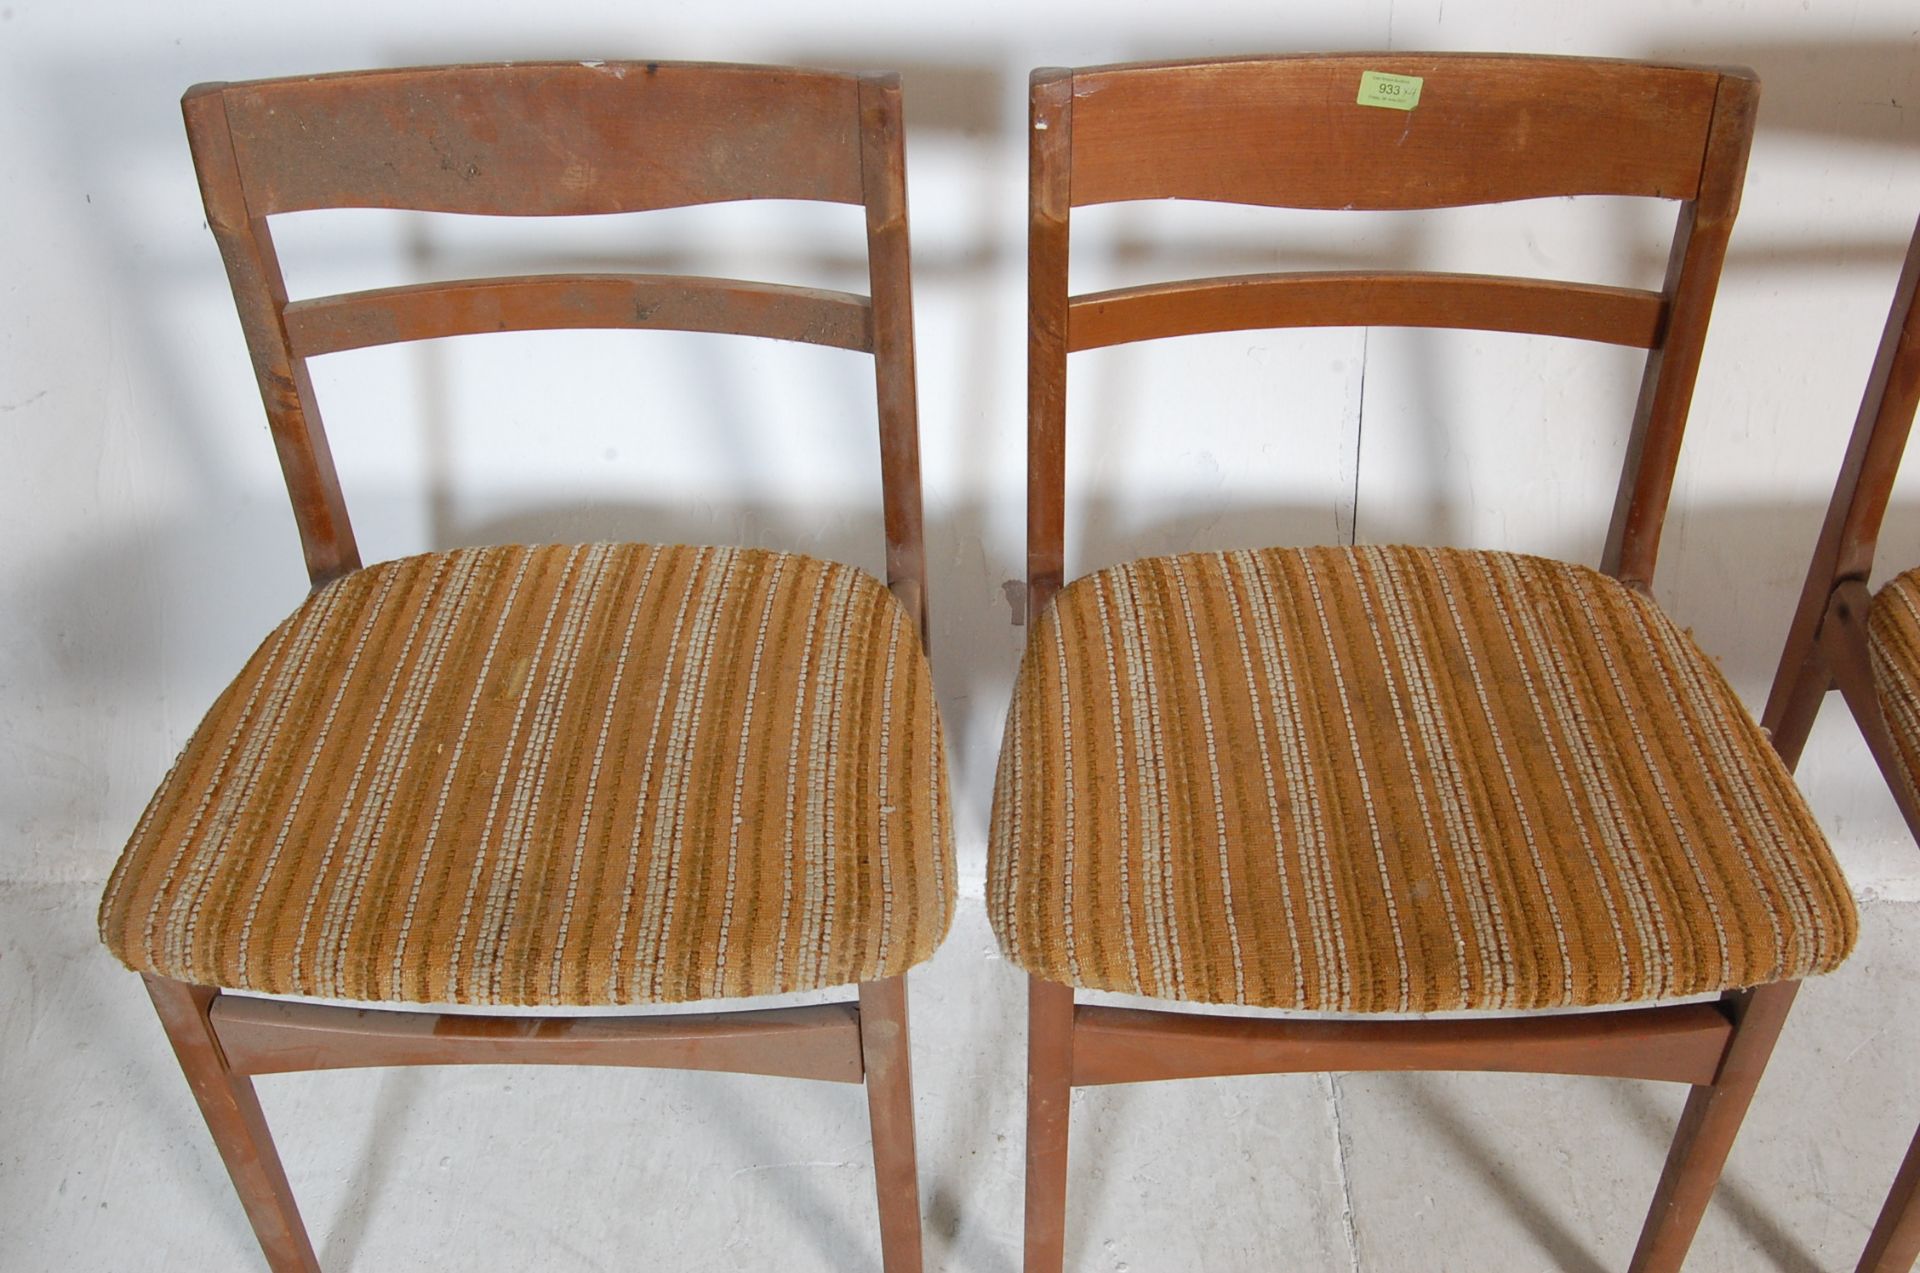 FOUR VINTAGE TEAK WOOD FRAME DINING CHAIRS BY NATHAN - Image 3 of 6